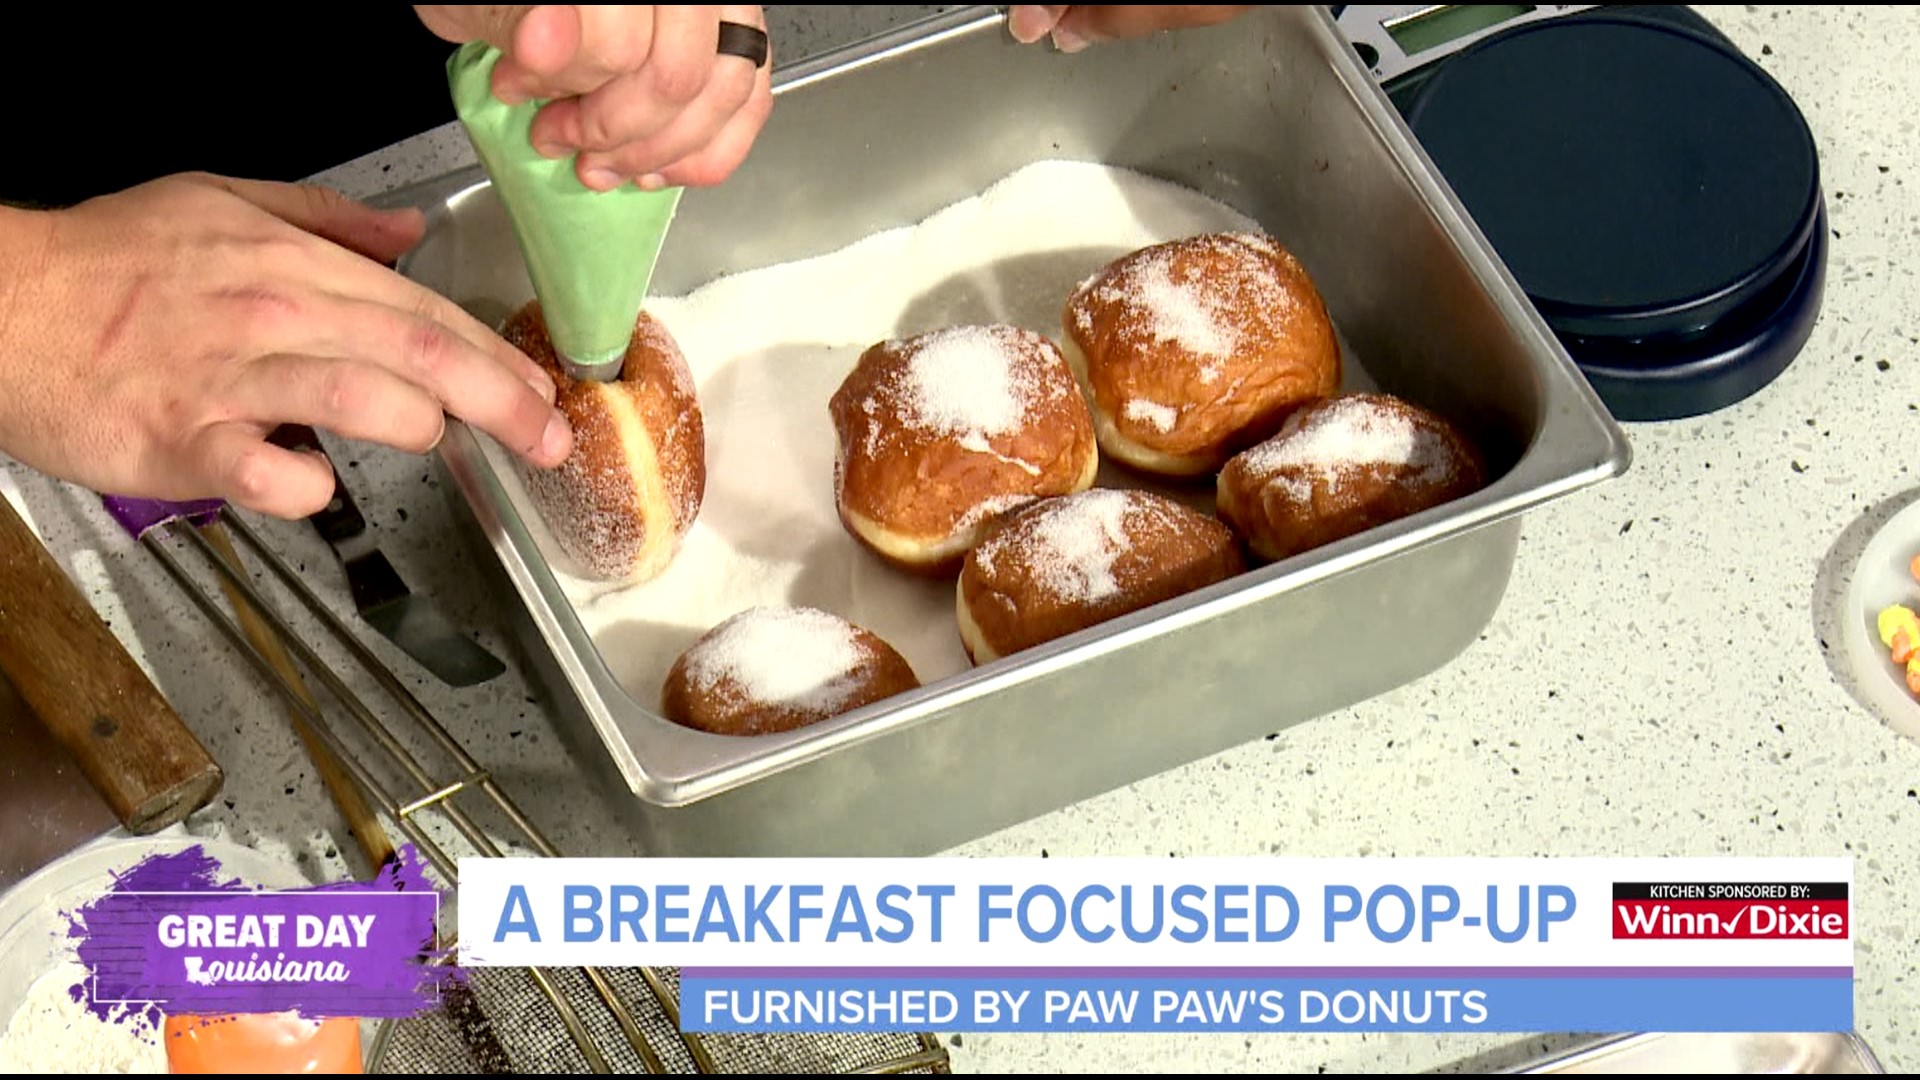 We learn about the unique fillings available at breakfast pop-up Paw Paw's Donuts.